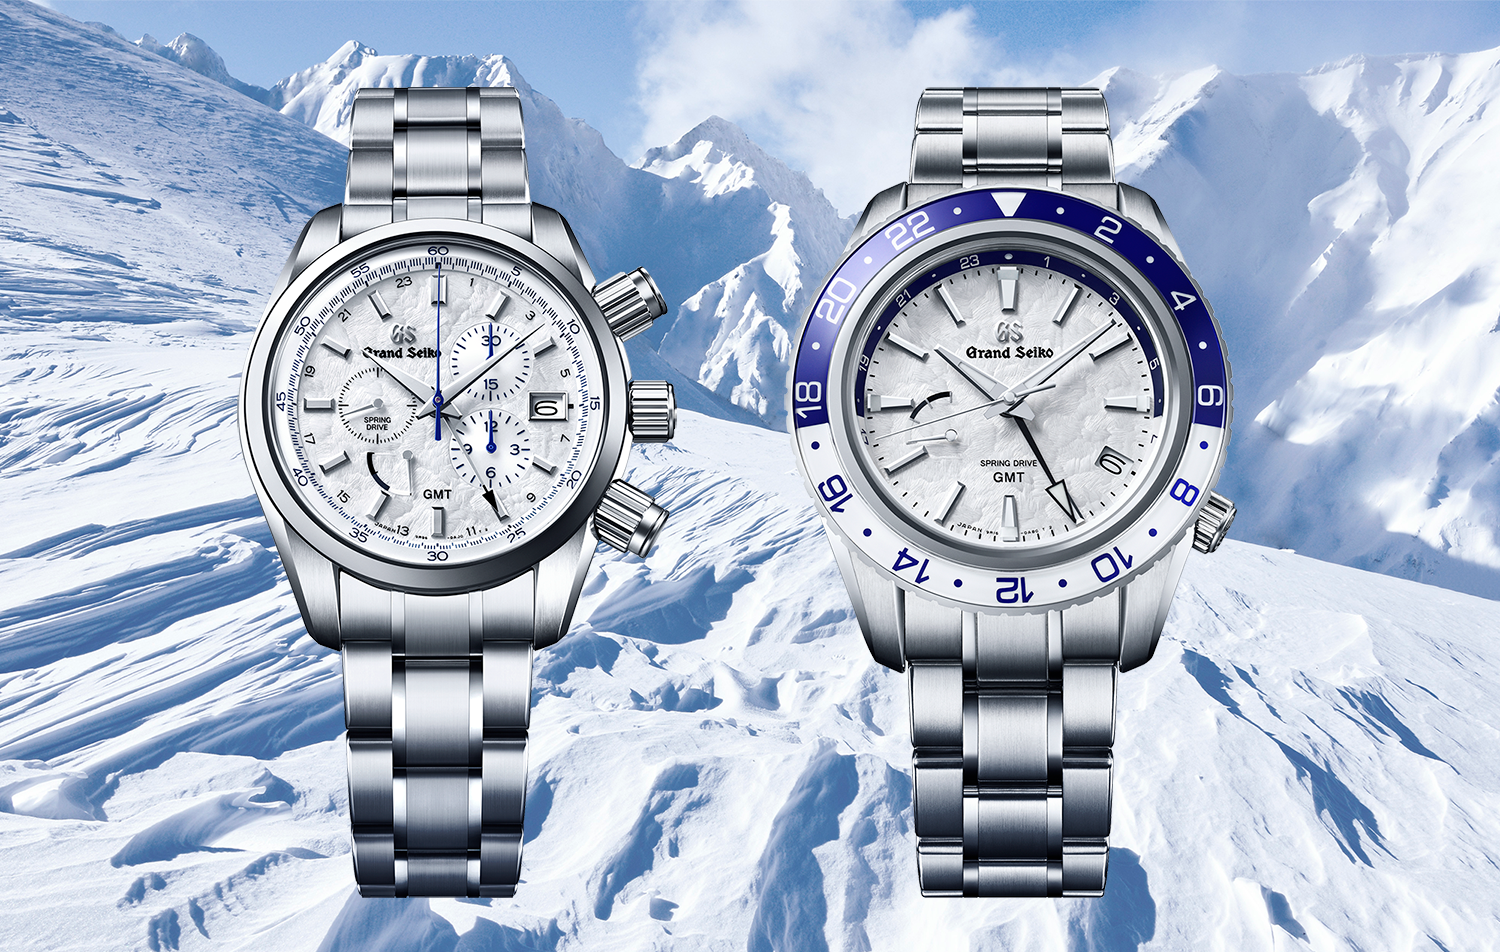 Two Grand Seiko sport watches capture the beauty of winter